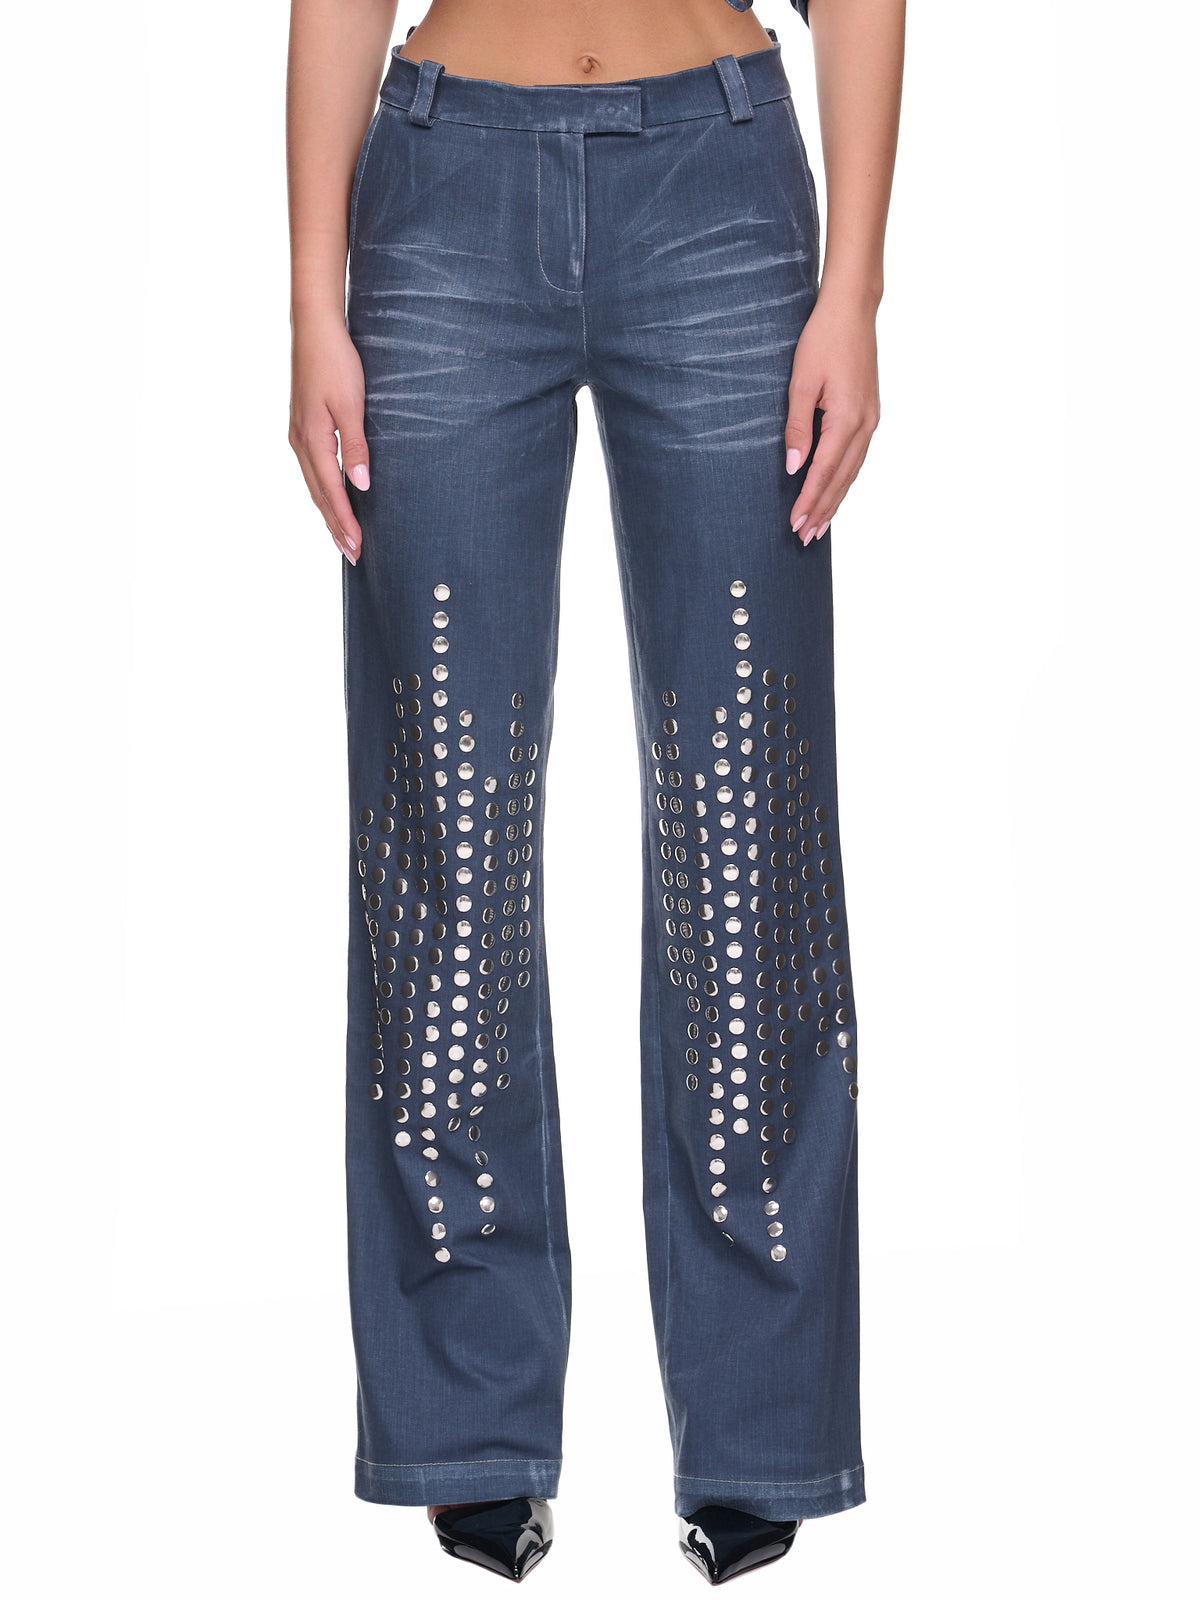 Distressed Studded Jeans (PACOWI01-WASHED-INDIGO)